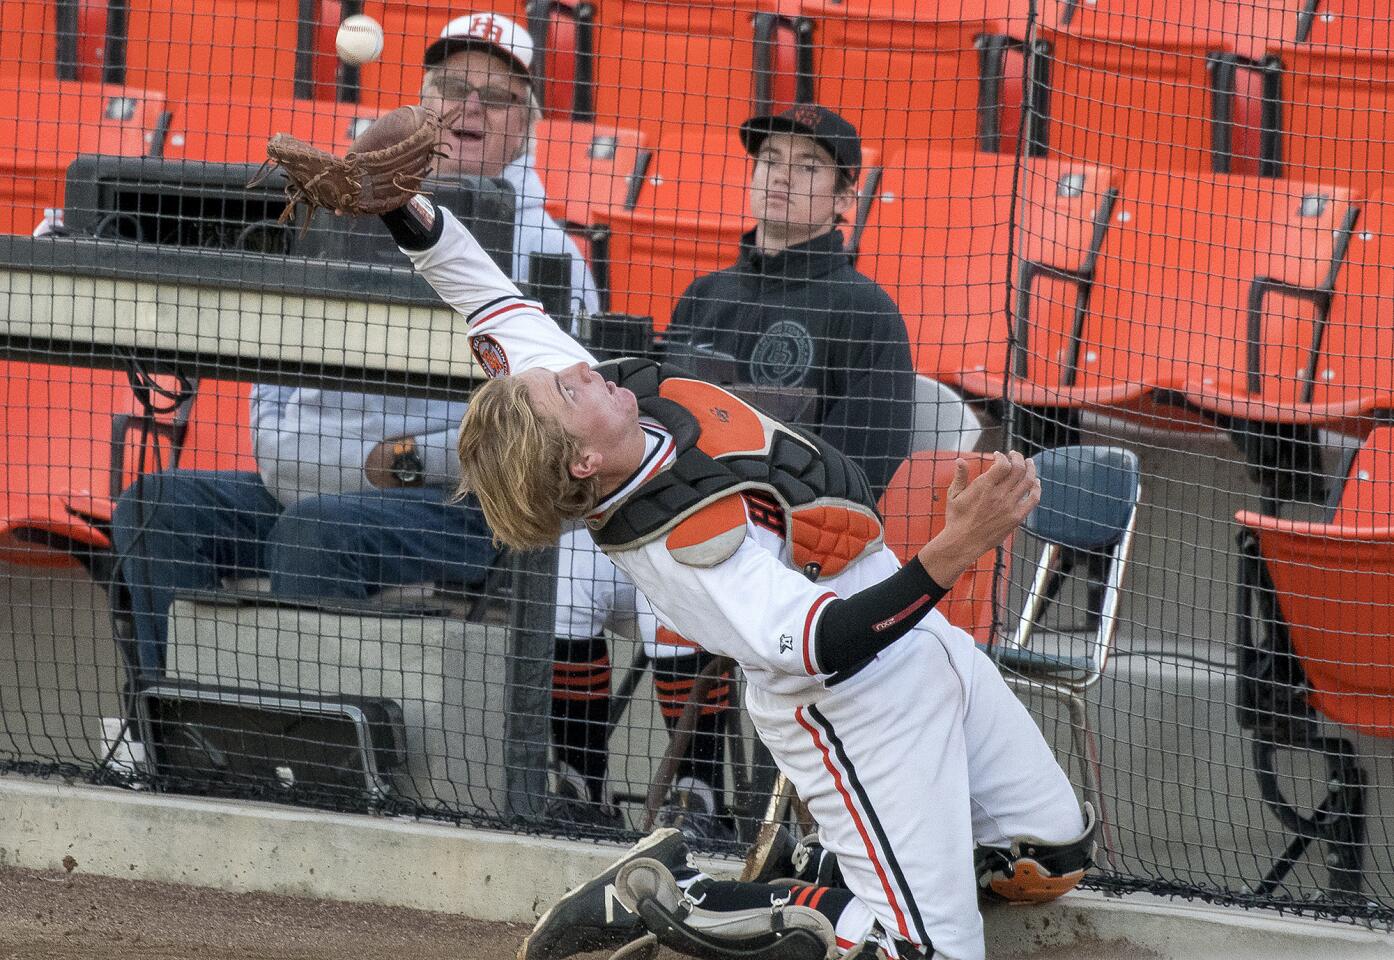 Huntington Beach's Brian Reed catches a pop up foul ball behind the plate to close out the game against La Verne Damien on Thursday, March 1.